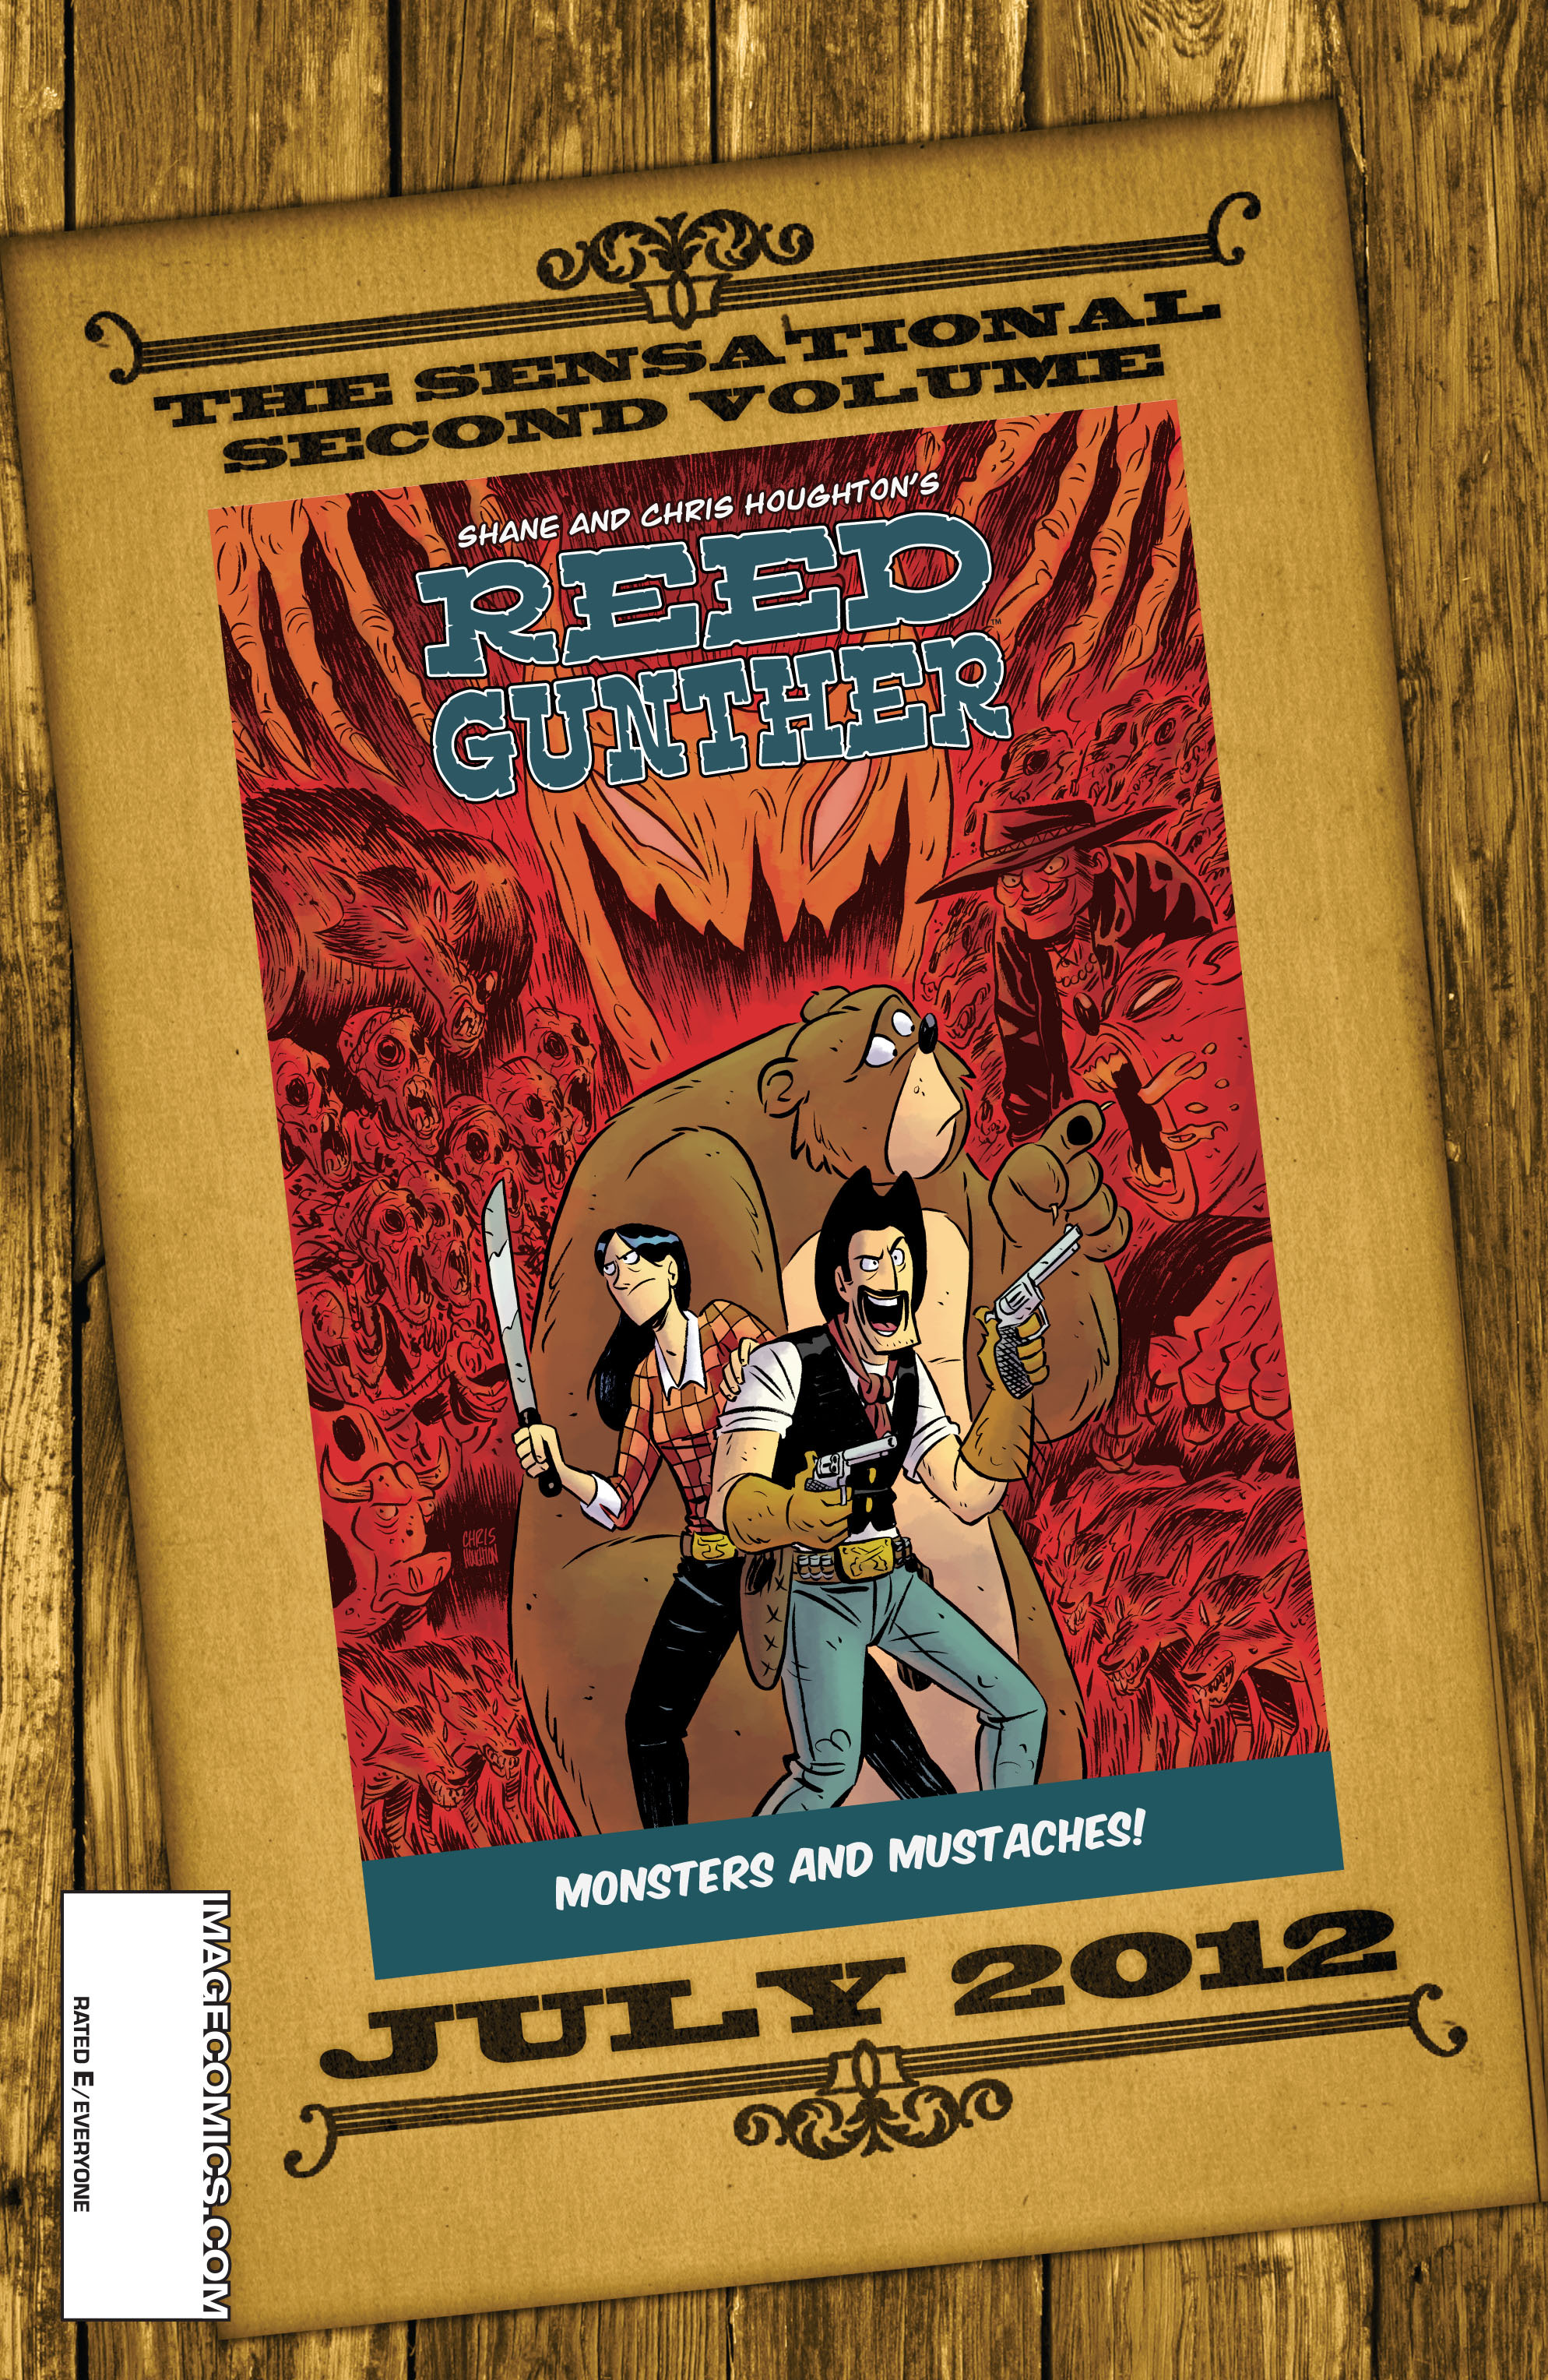 Read online Reed Gunther comic -  Issue #10 - 31